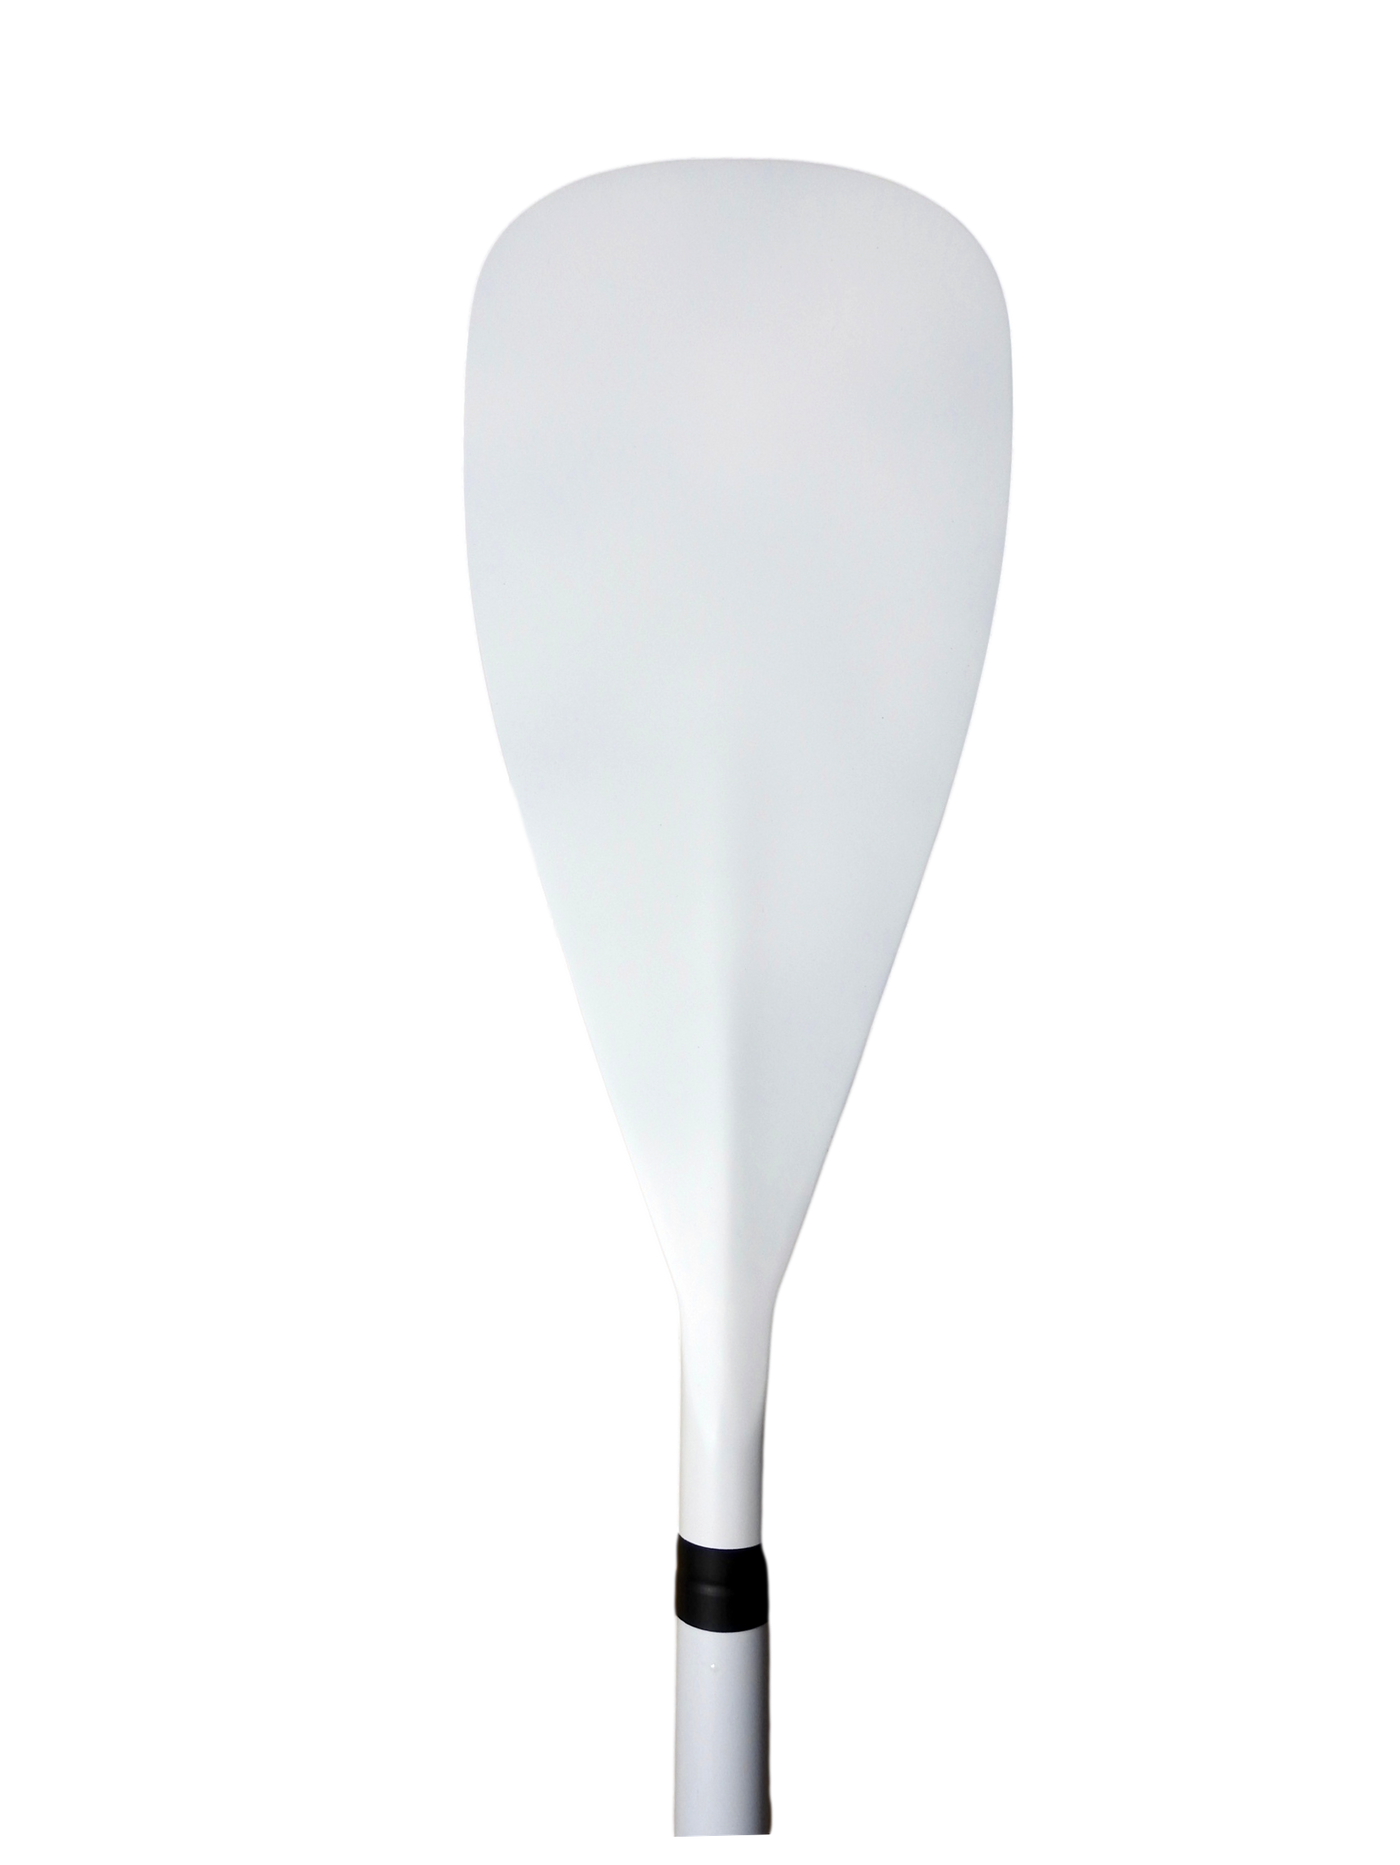 SUP Paddle White & Black Adjustable Alleydesigns Paddle - Alleydesigns  Pty Ltd                                             ABN: 44165571264